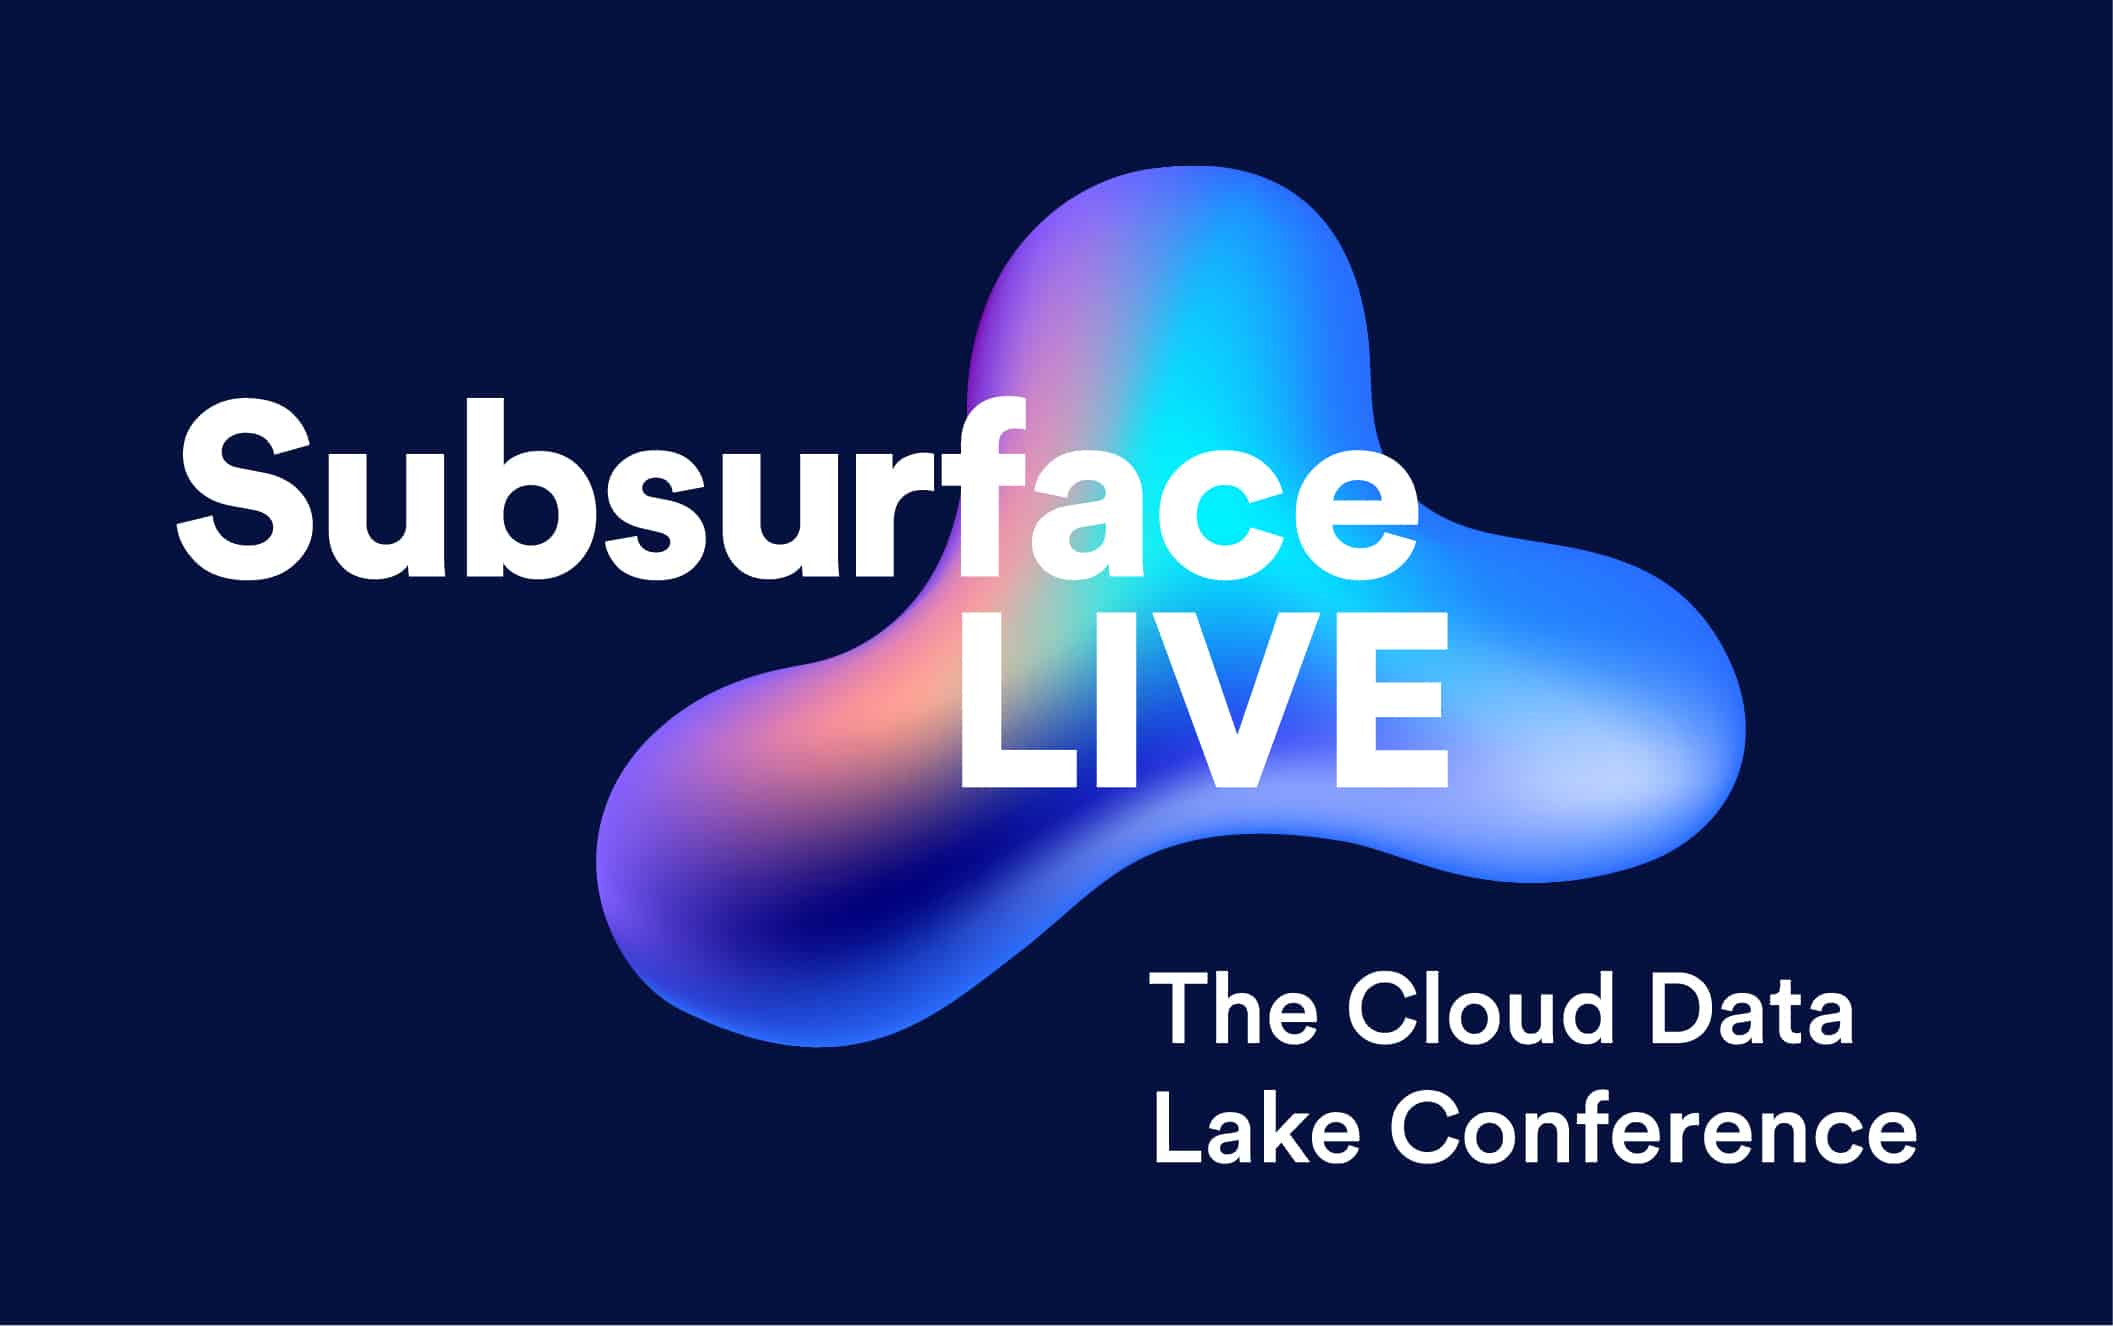 Subsurface LIVE: The Cloud Data Lake Conference